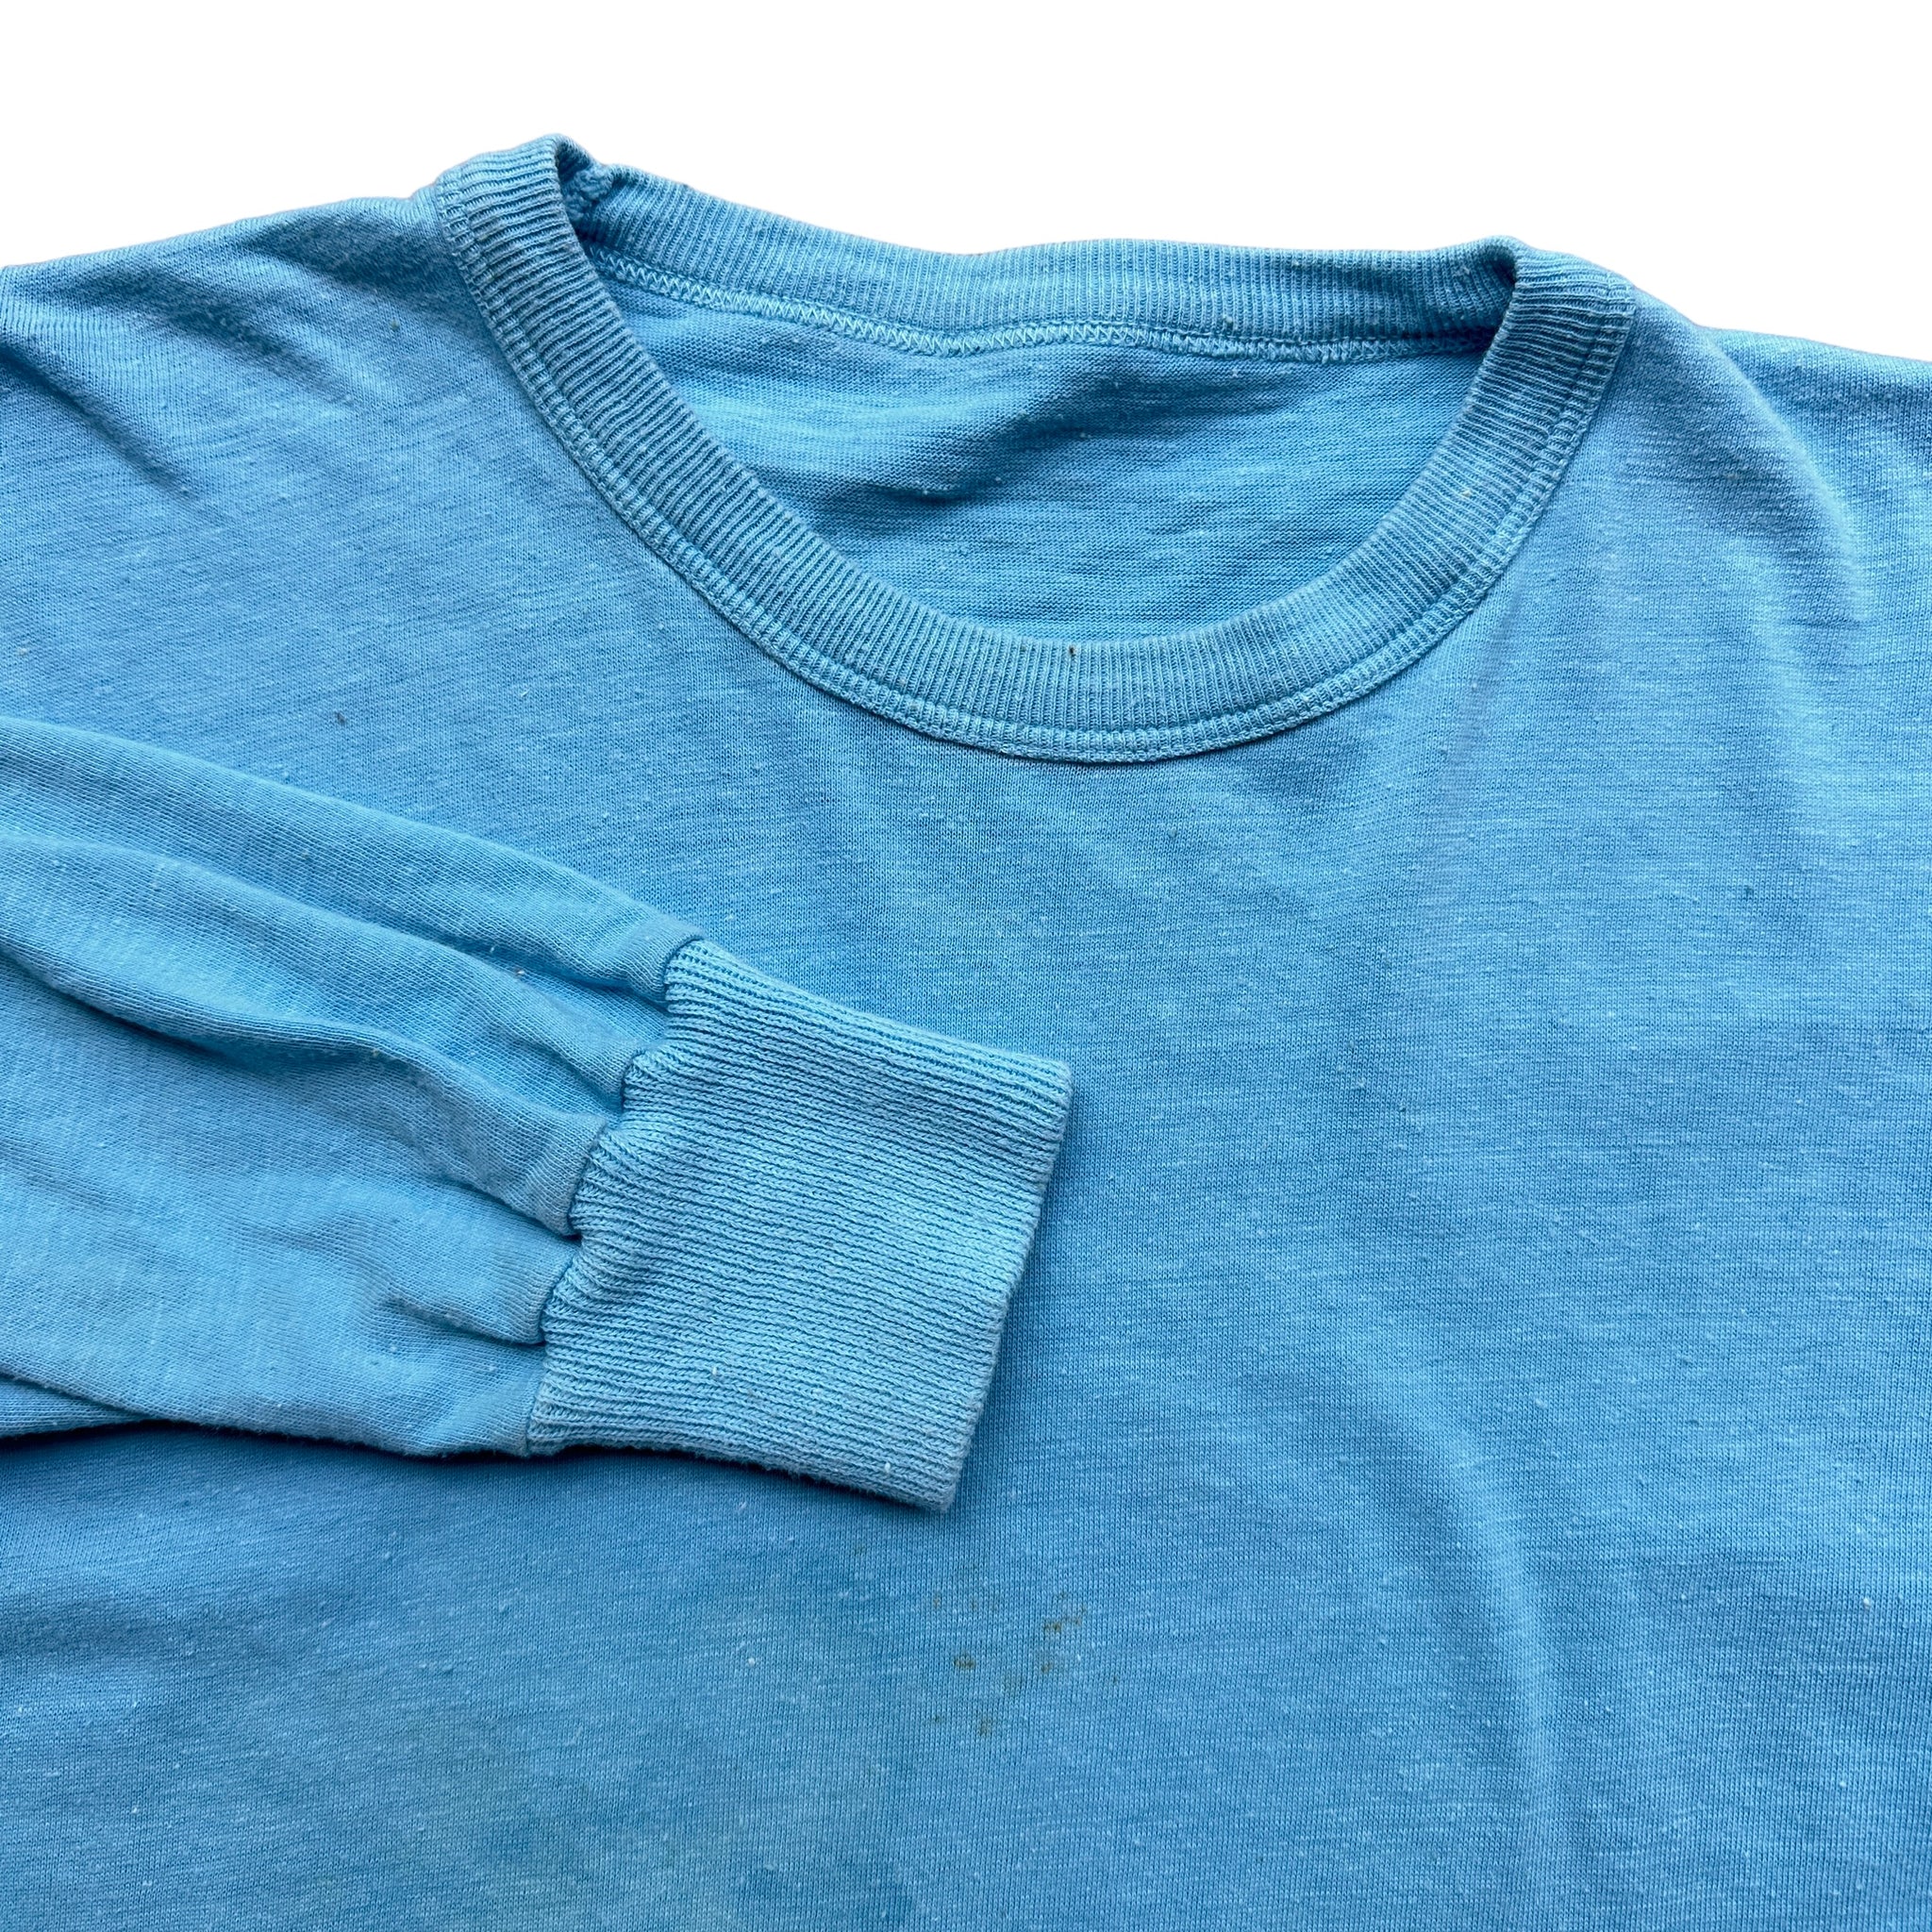 70s Baby blue long sleeve S/M